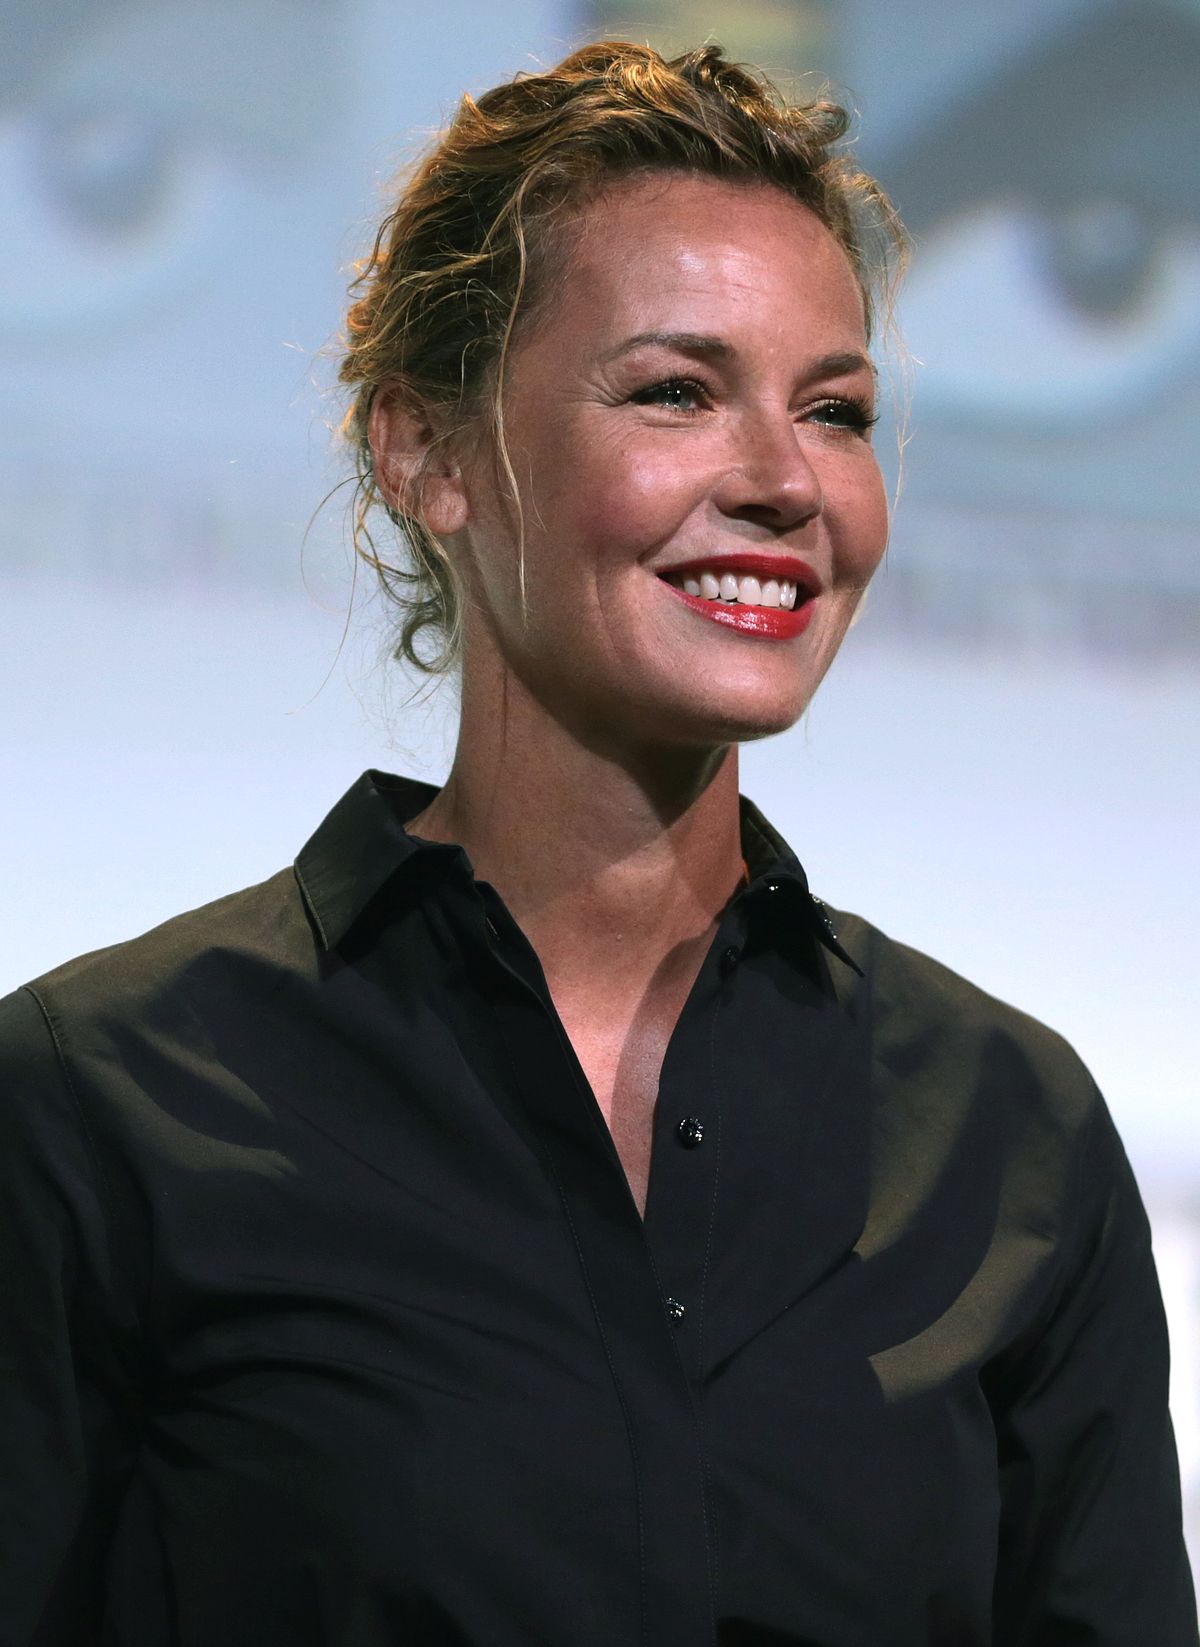 https://upload.wikimedia.org/wikipedia/commons/thumb/2/2c/Connie_Nielsen_by_Gage_Skidmore.jpg/1200px-Connie_Nielsen_by_Gage_Skidmore.jpg